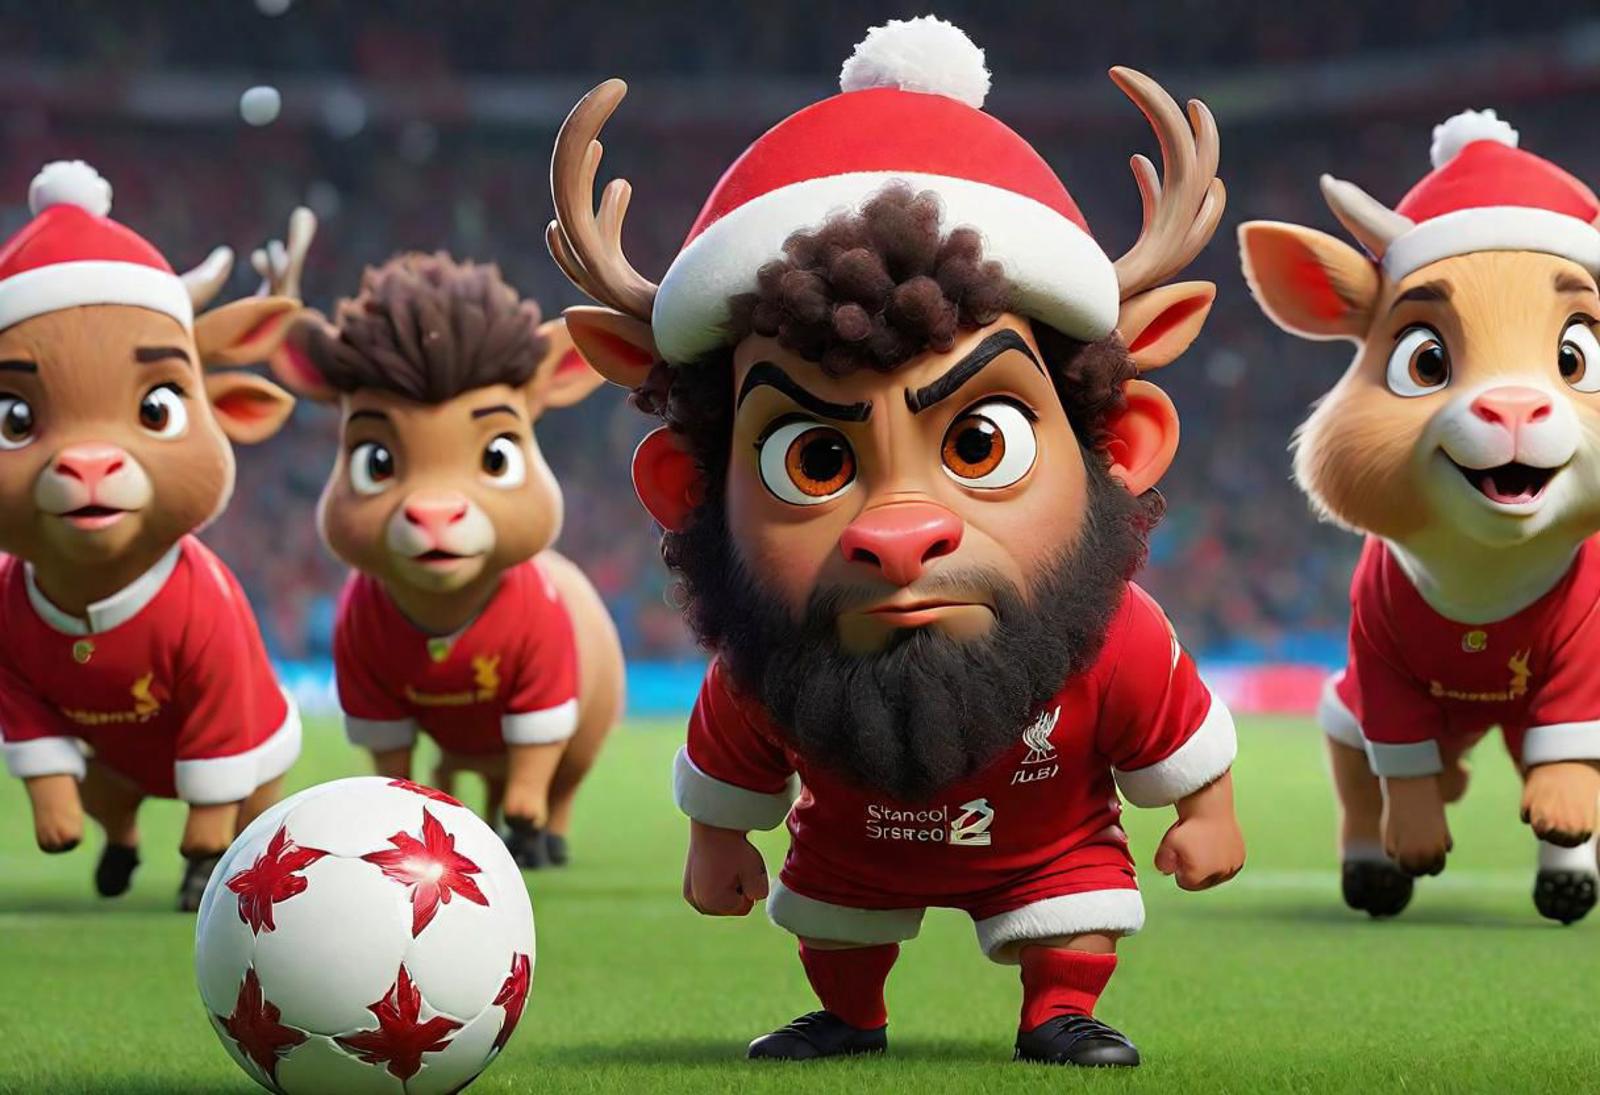 A cartoon soccer player with a beard and mustache wearing a Santa hat and holding a soccer ball.